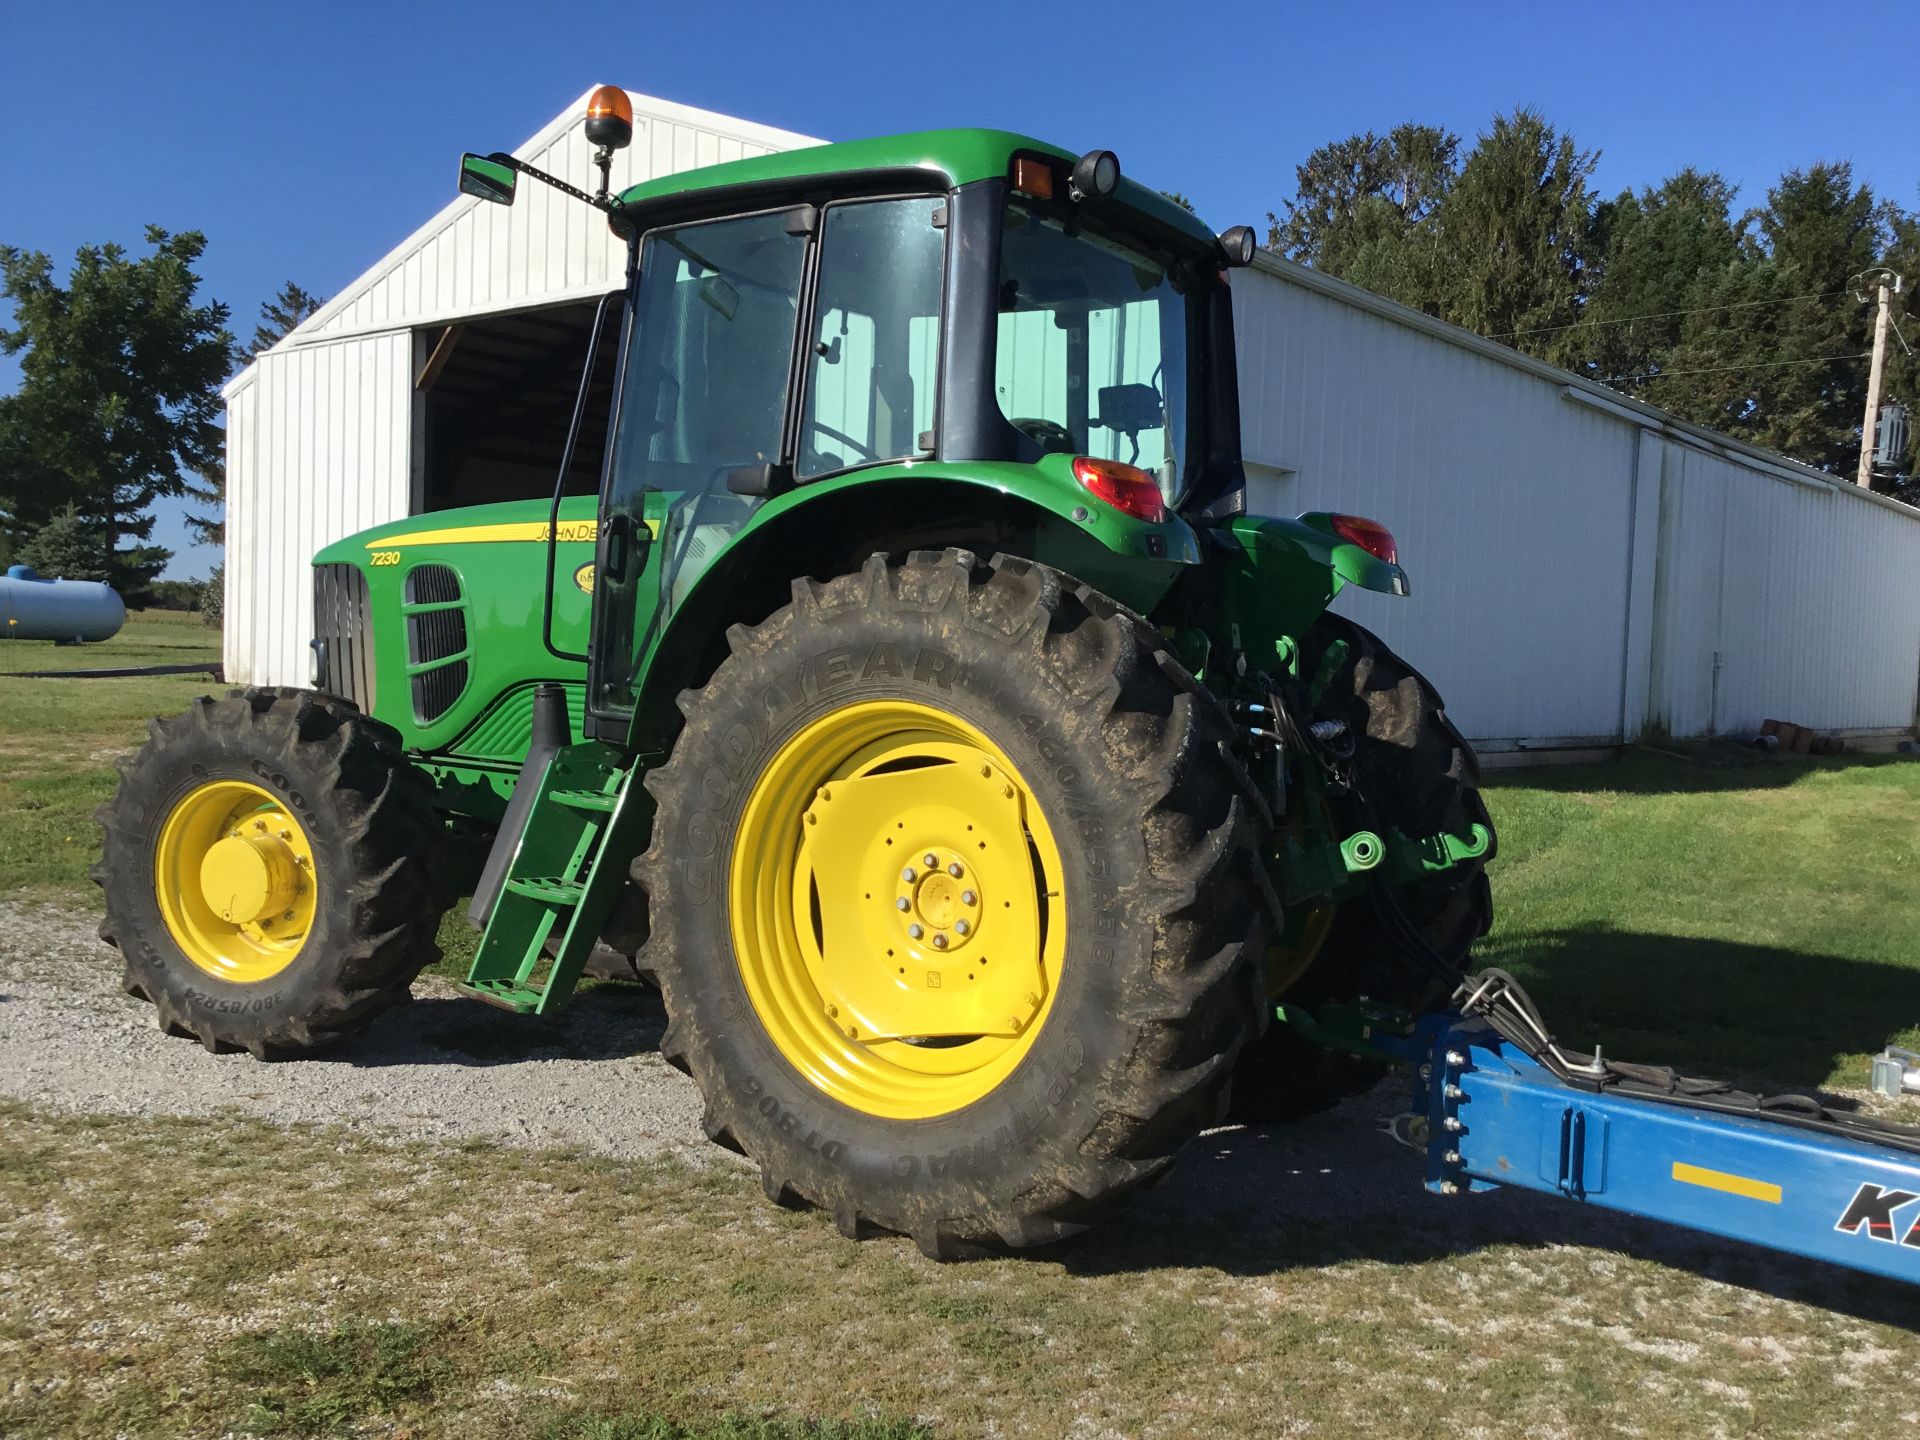 2009 JD 7230 MFWD, 24 Speed Trans, 3 Hyd. Remotes, 1000 PTO, 8 Front Wts., 460/85R38 Rear Tires, - Image 6 of 16